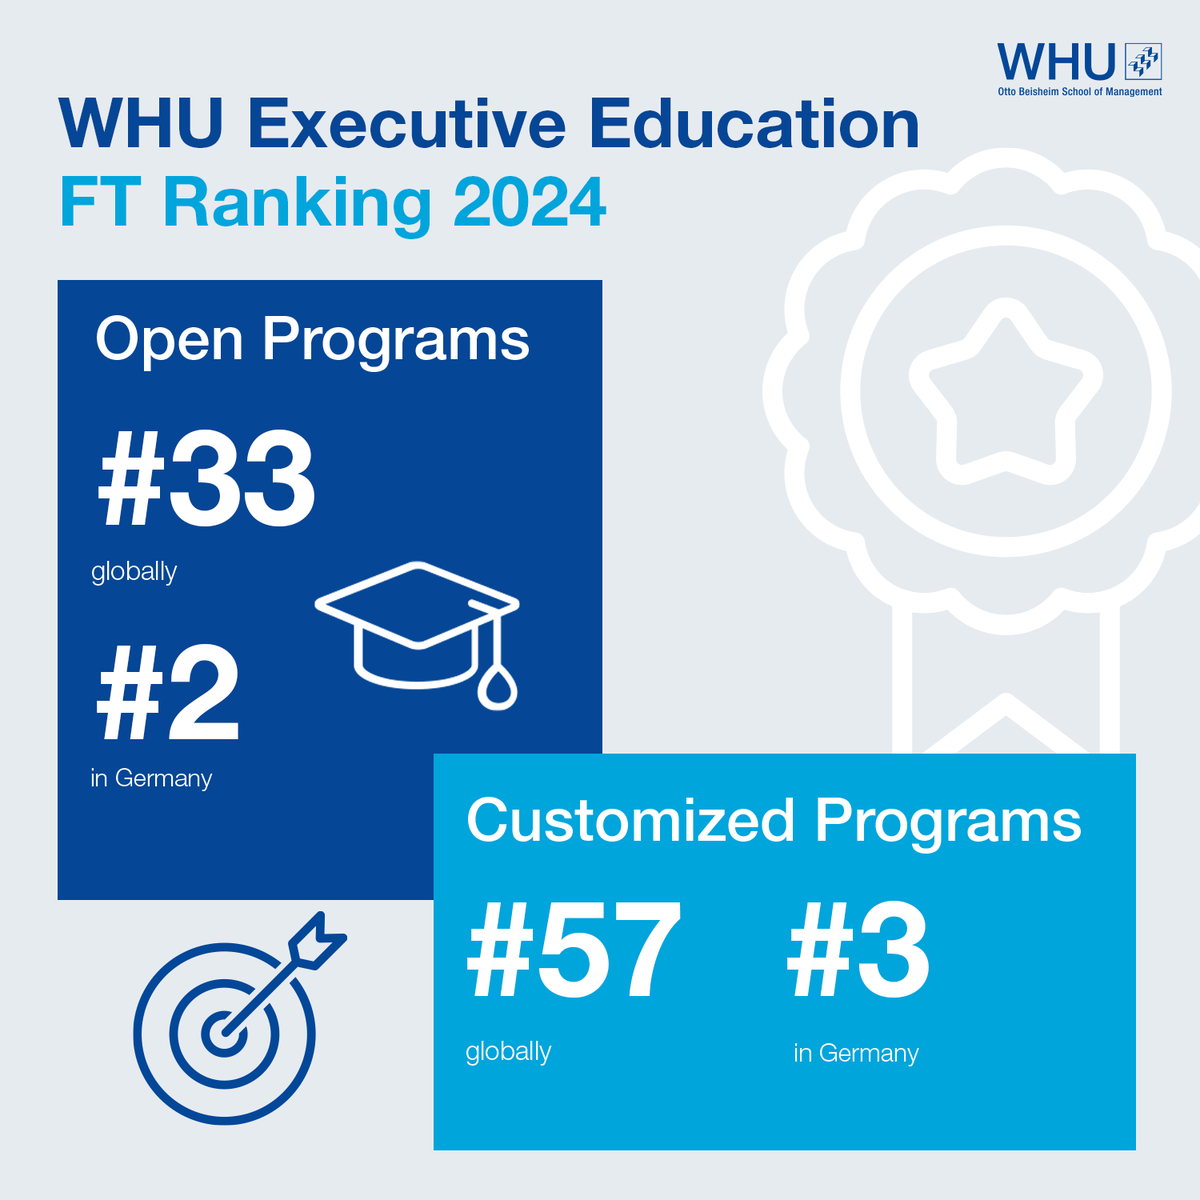 We are happy to share the results of the renowned @FT Executive Education Ranking 2024, which places the WHU Executive Education programs in a strong position. Our Open Programs come in at #33, and the Customized Programs remain at position #57 on the global stage. #myWHU